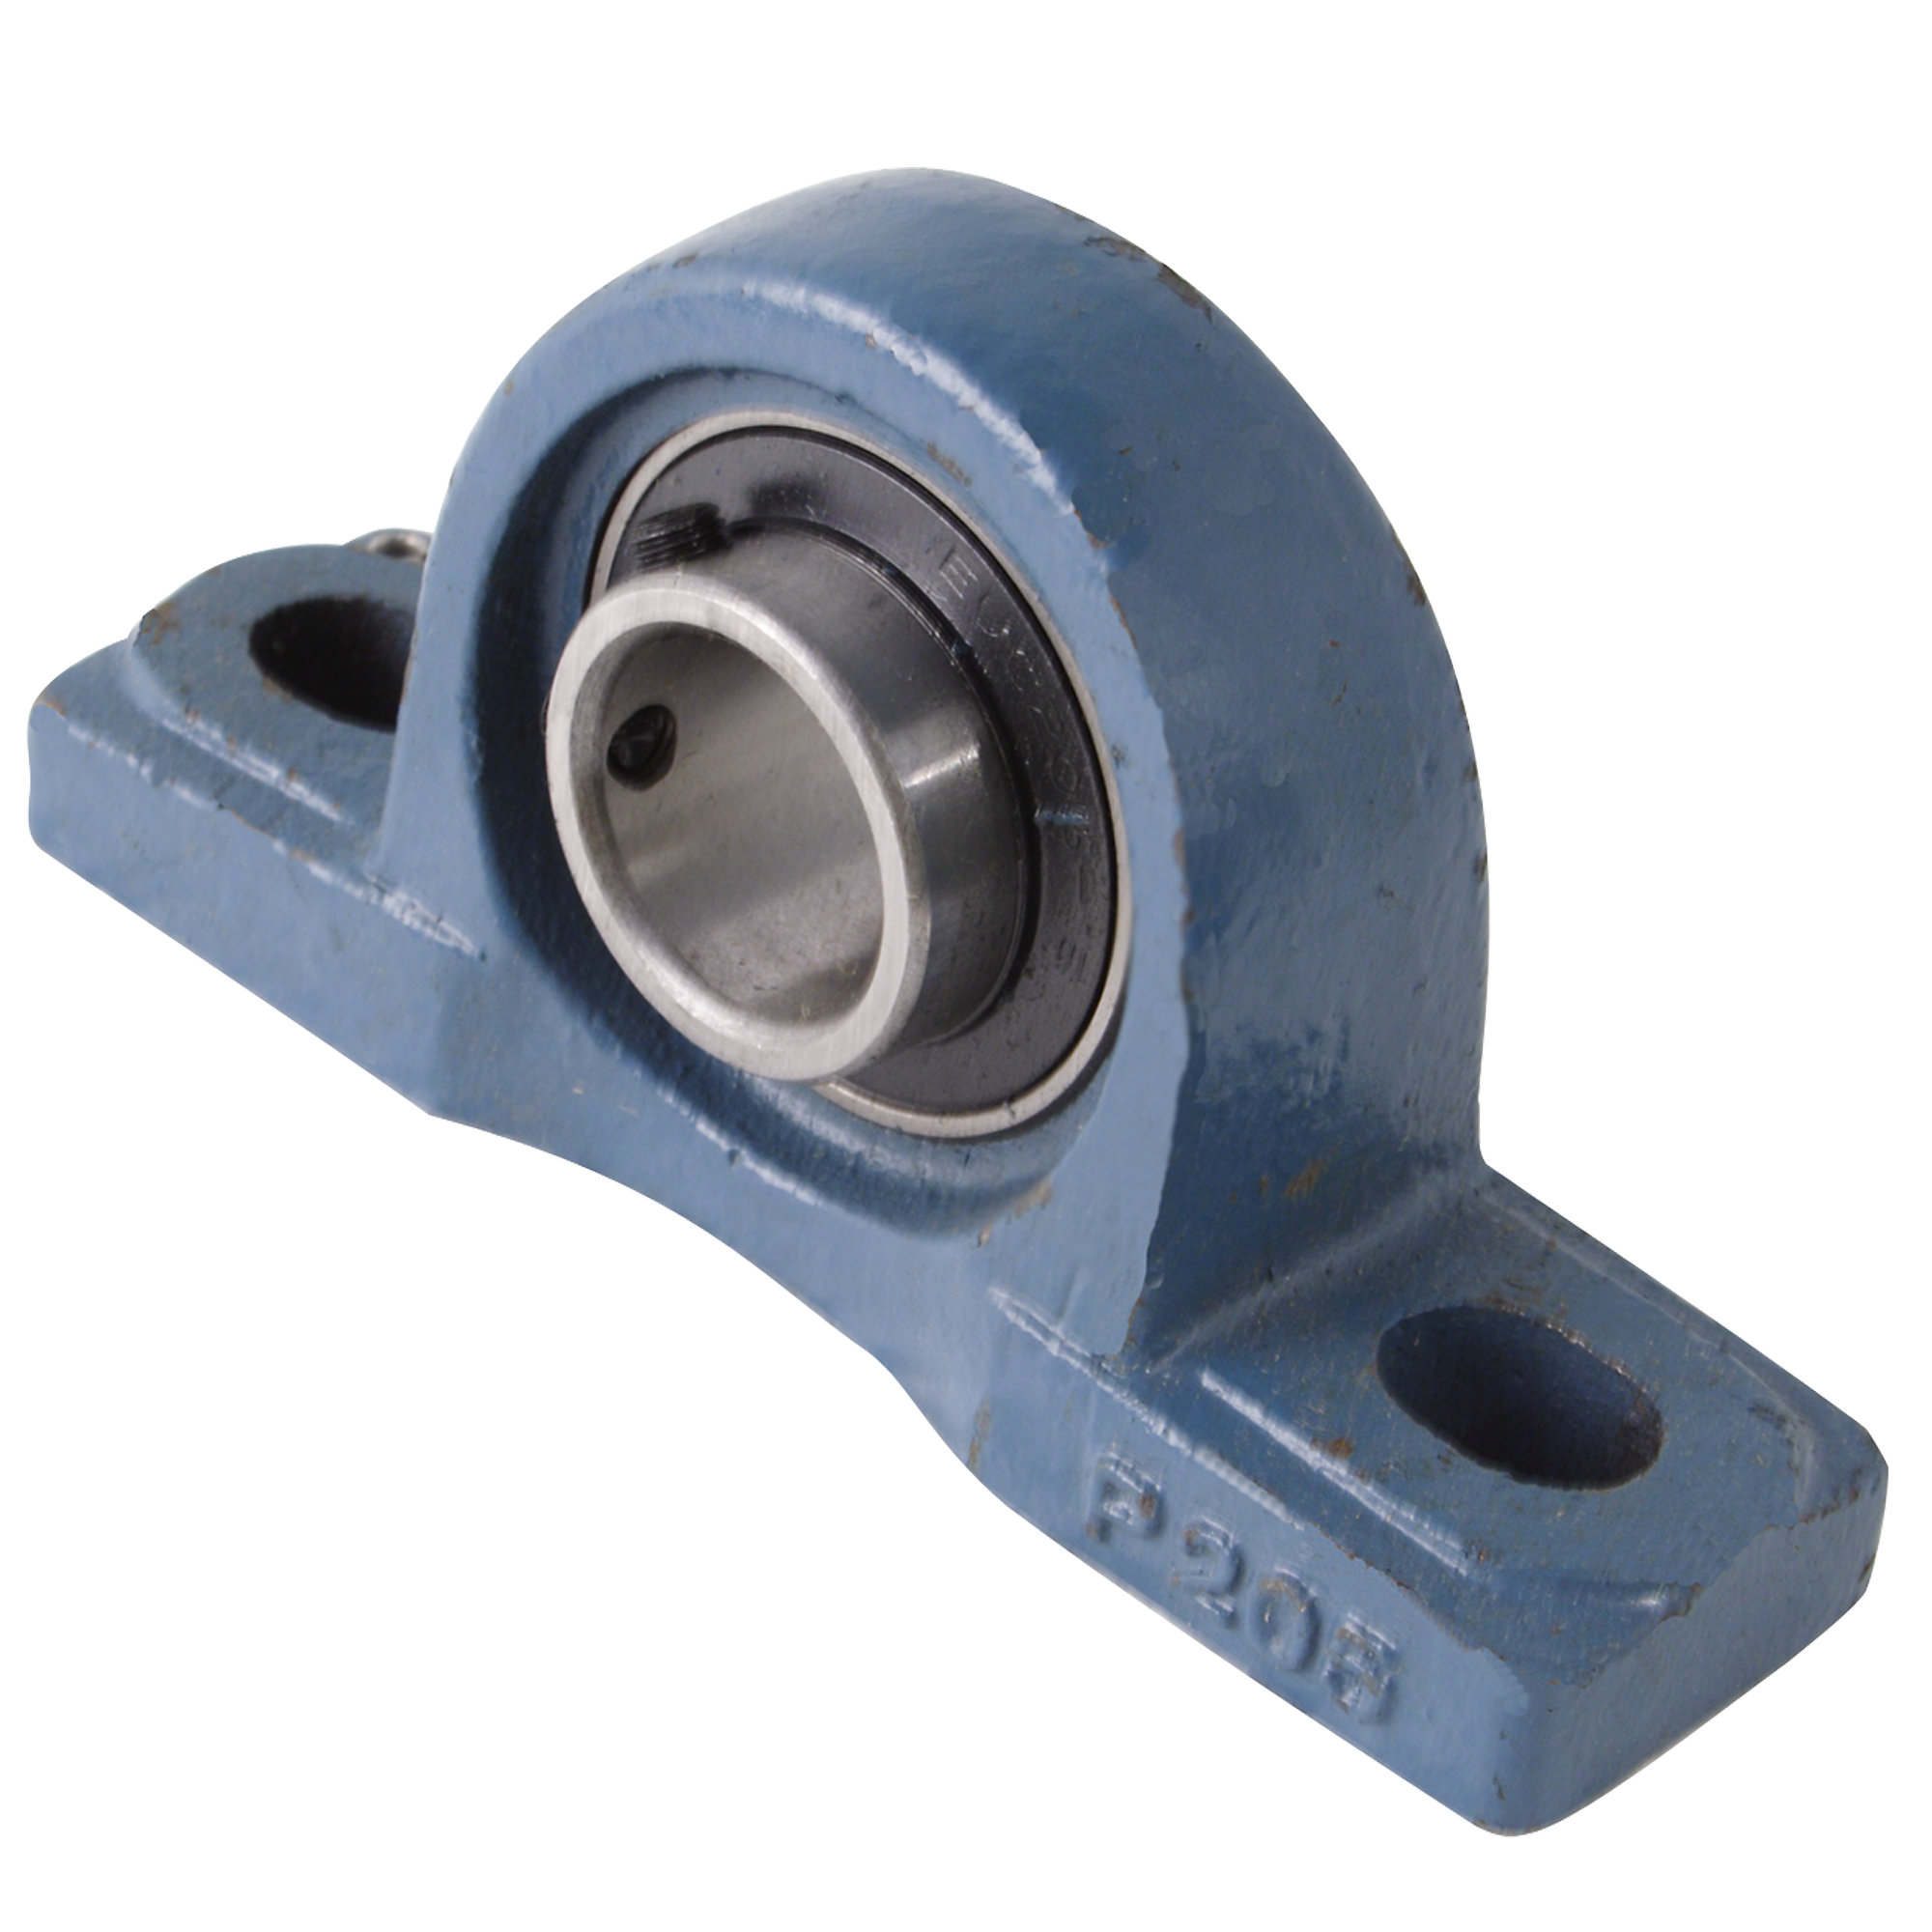 Pillow Block Bearing for Double Pulley Assembly, Cybex